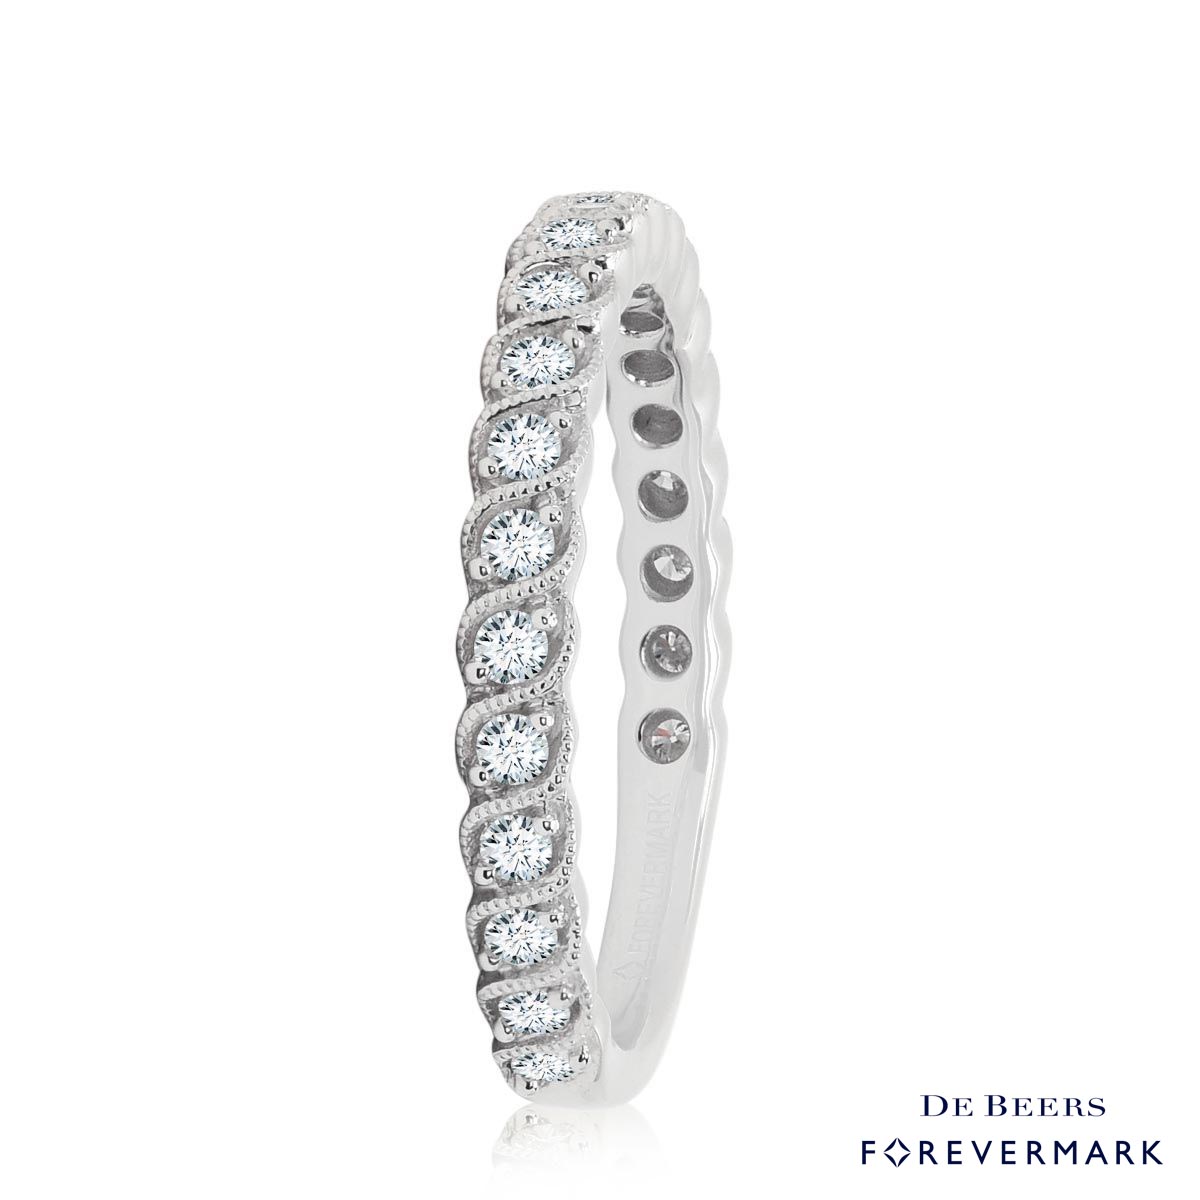 De Beers Forevermark Petite Diamond Band in 18kt White Gold (1/3ct tw)